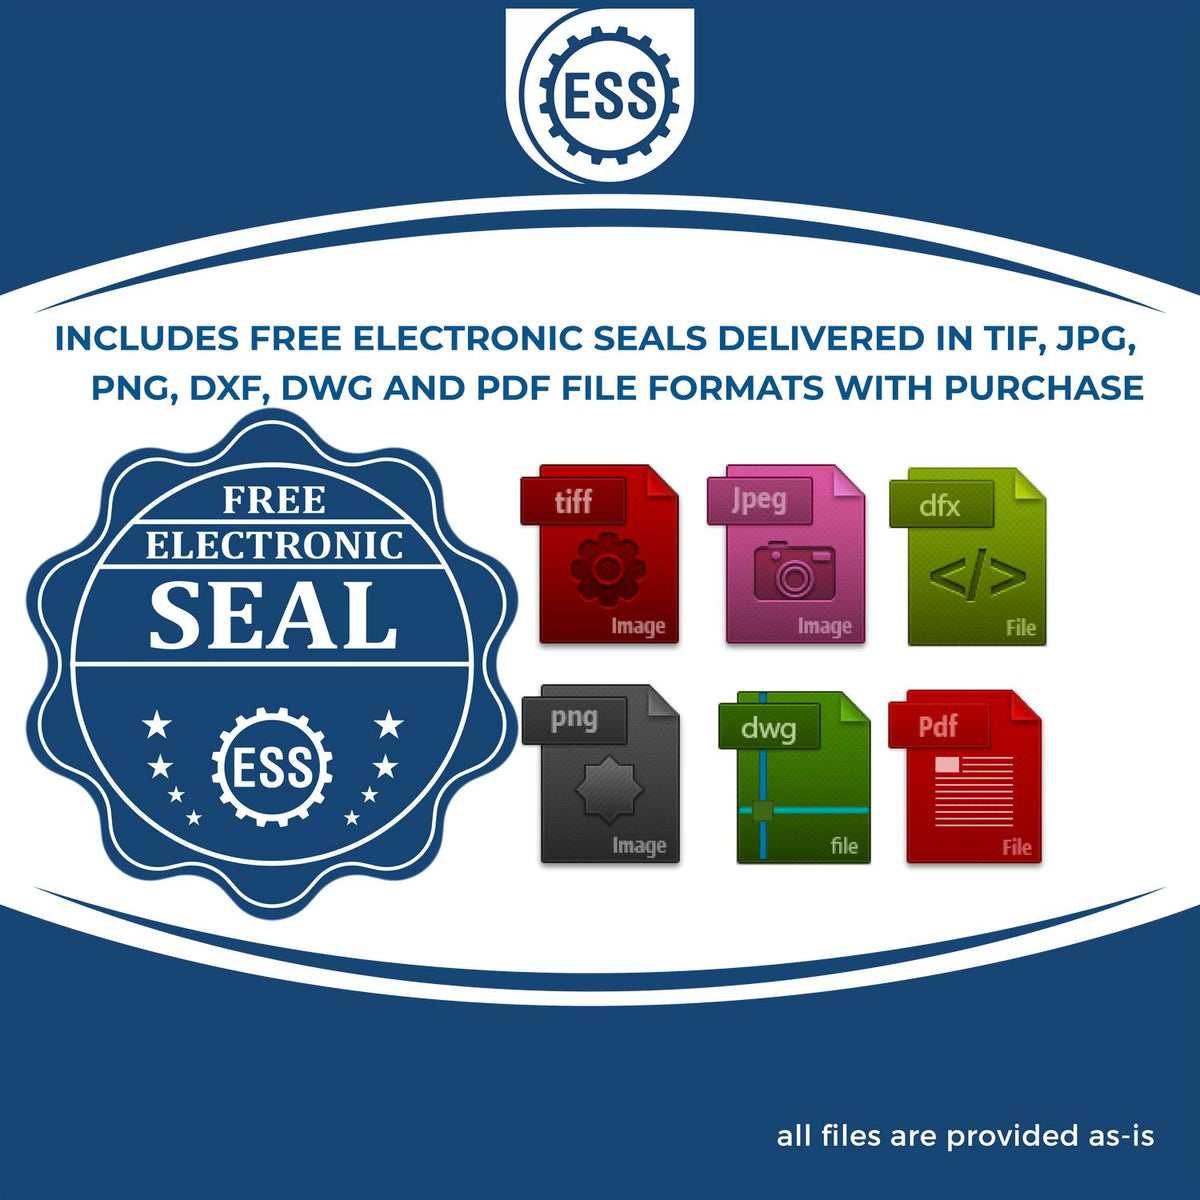 An infographic for the free electronic seal for the Premium MaxLight Pre-Inked Indiana Landscape Architectural Stamp illustrating the different file type icons such as DXF, DWG, TIF, JPG and PNG.